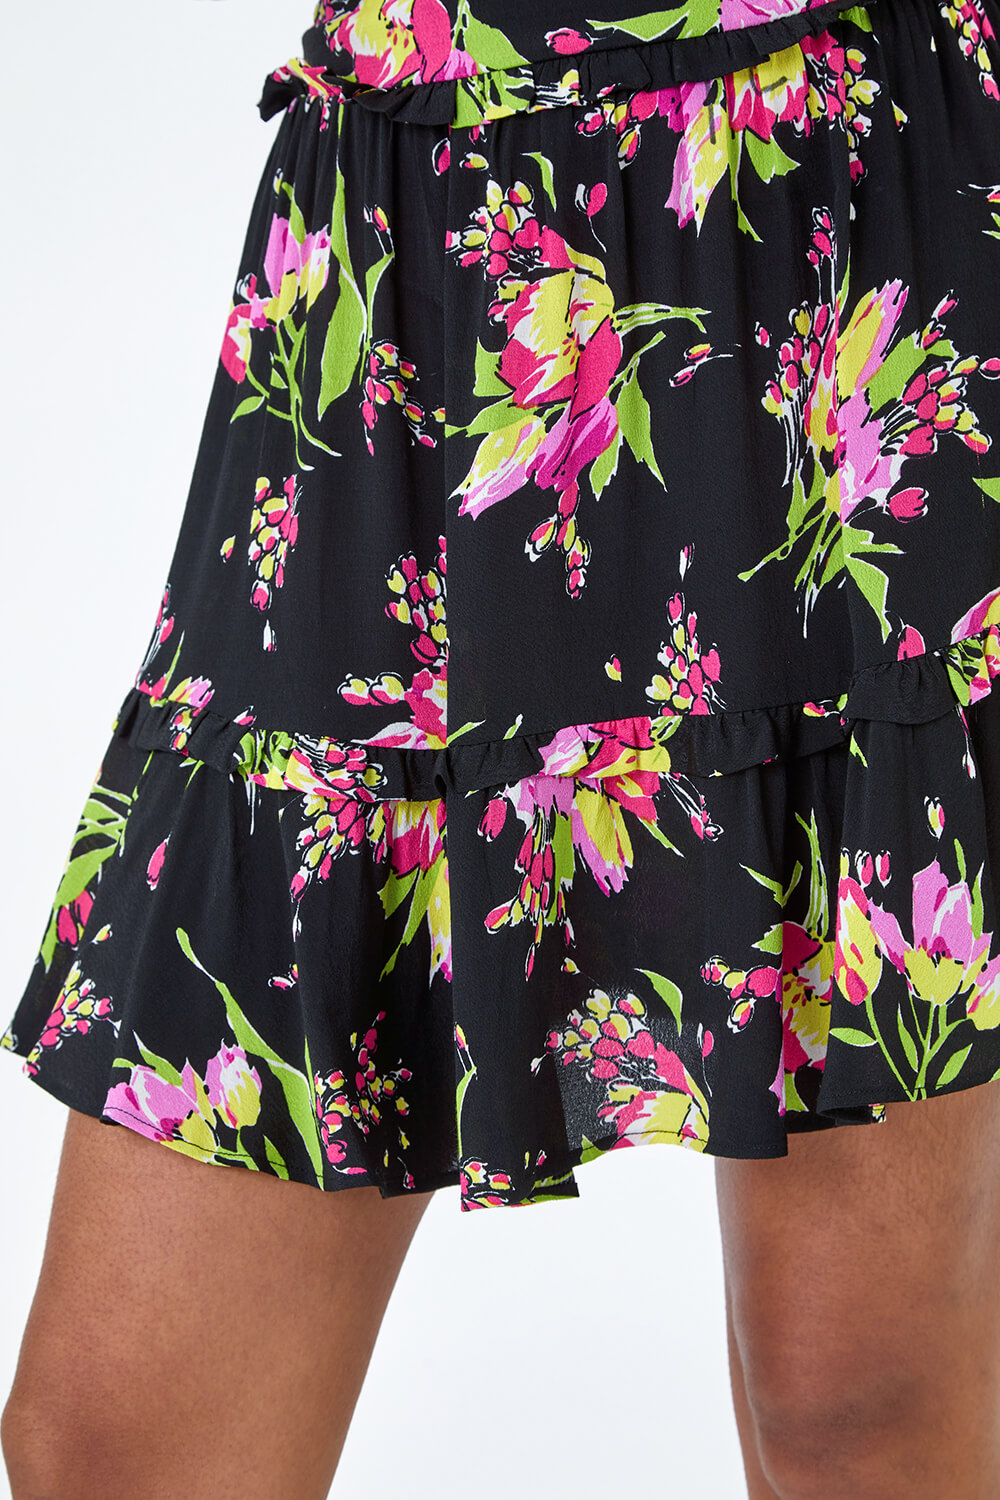 Black Floral Frill Trim Tiered Skirt, Image 5 of 5